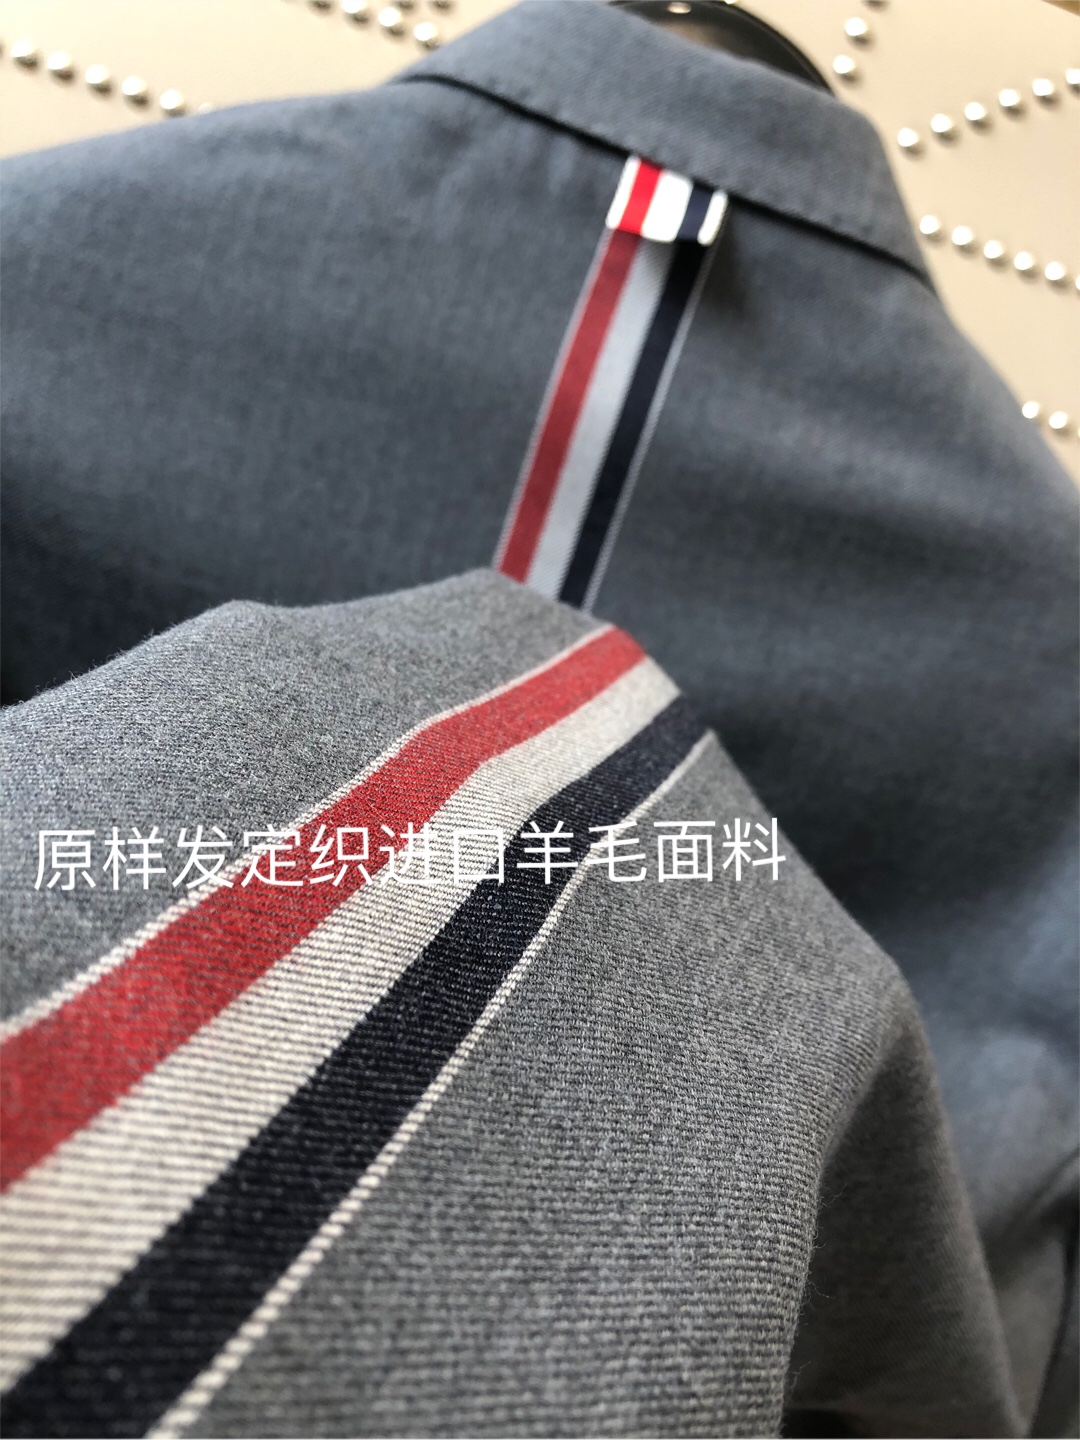 Thom Browne Business Suit